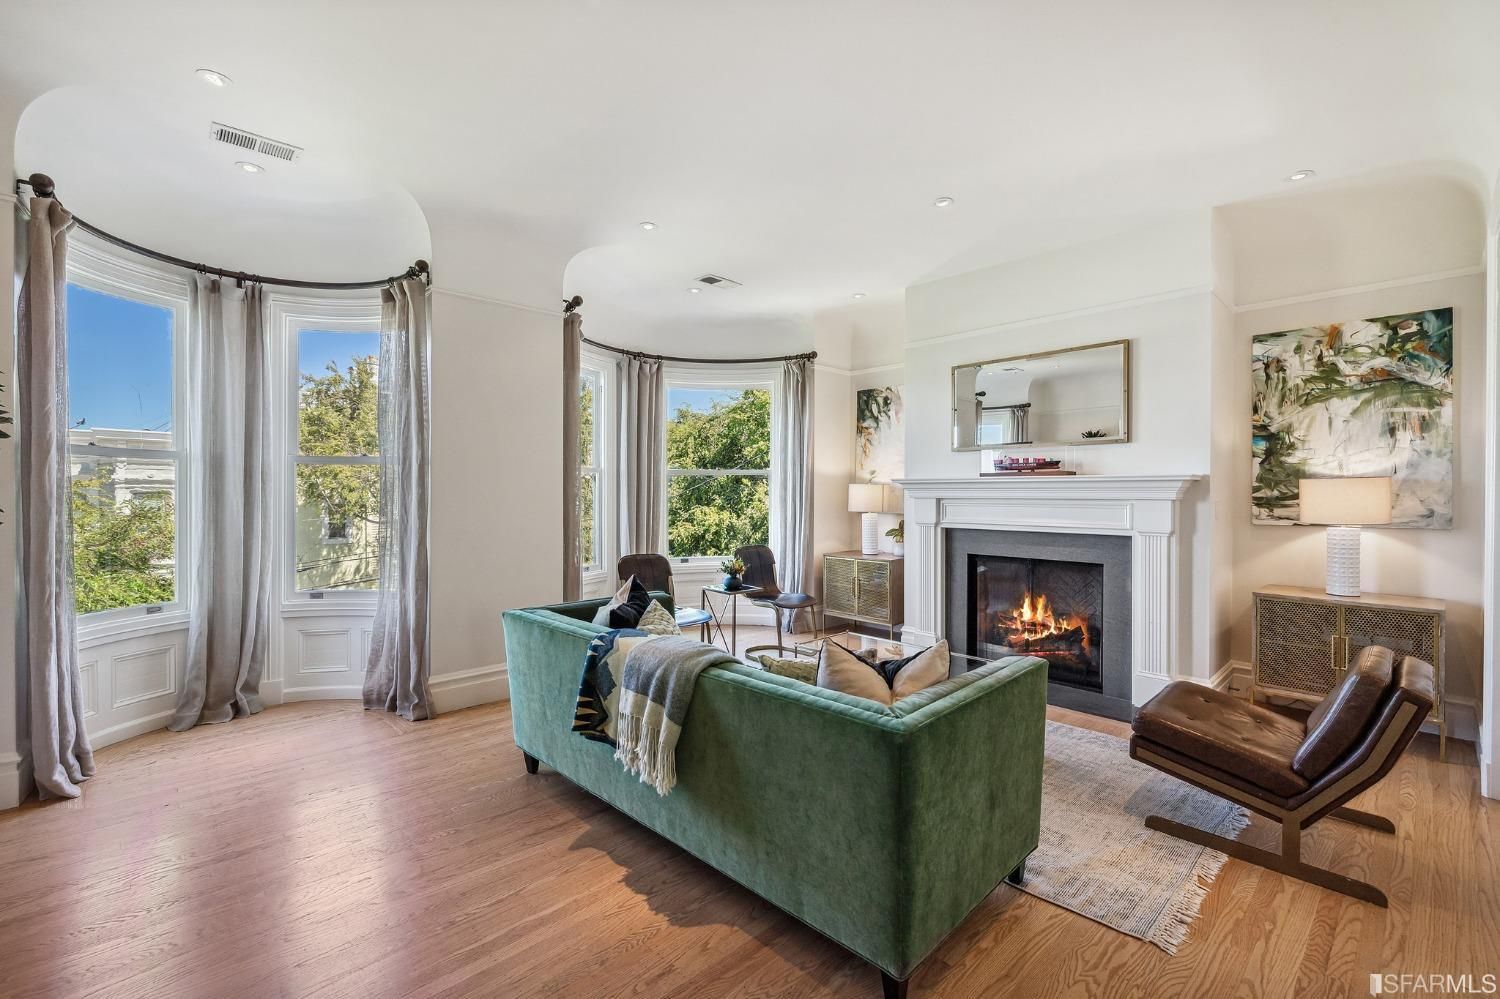 Property Photo: Living room at 286 Fair Oaks St, showing two large bay windows and a large fireplace